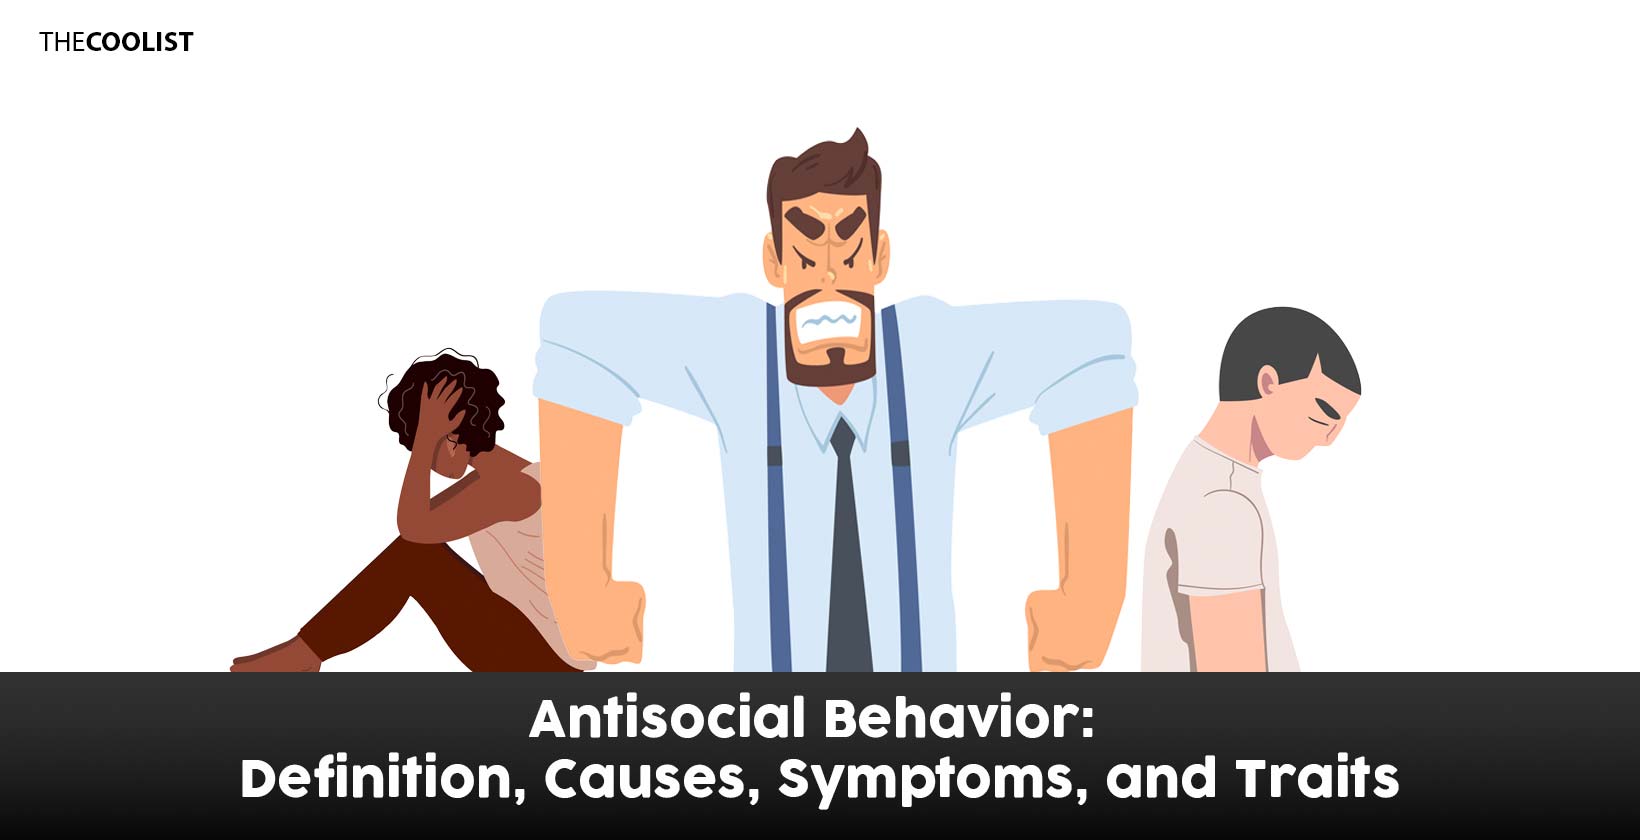 Antisocial Behavior: Definition, Causes, Symptoms, and Traits